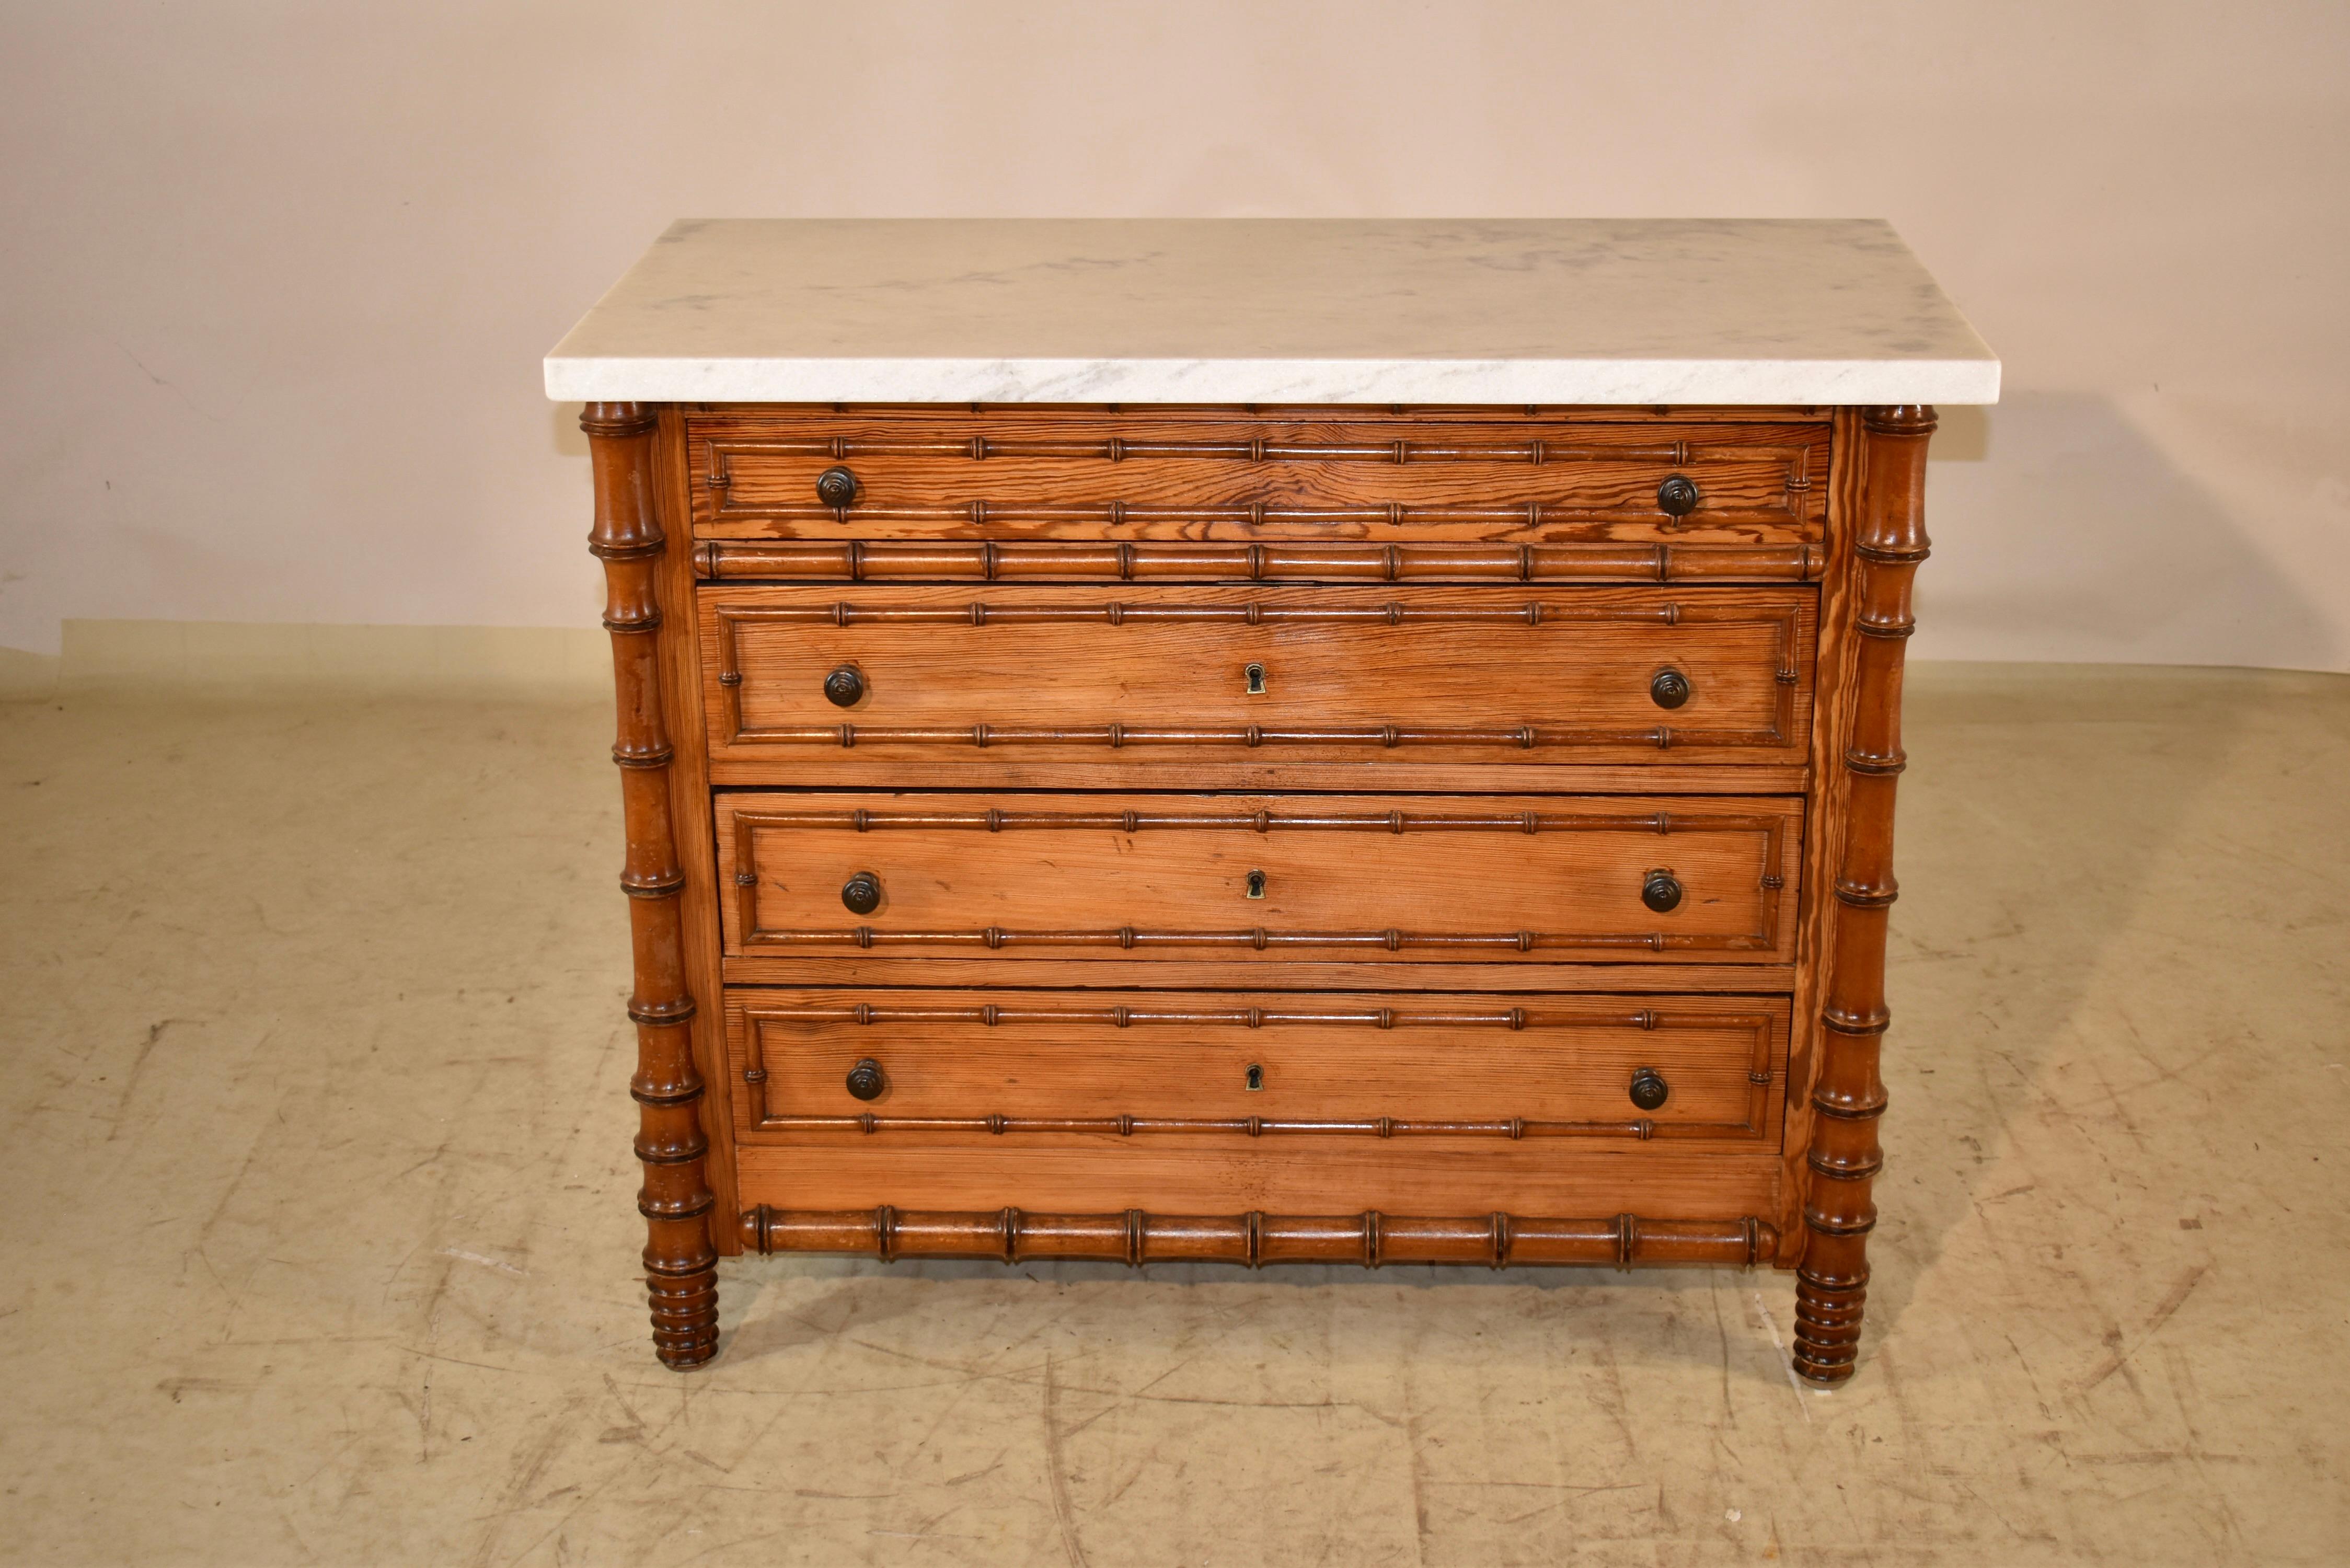 19th century faux bamboo chest of drawers from France.  The top has been replaced with Carrara marble, and sits upon the case, which is made of pitch pine.  The chest has four drawers, and all of the drawers have hand turned cherry moldings that